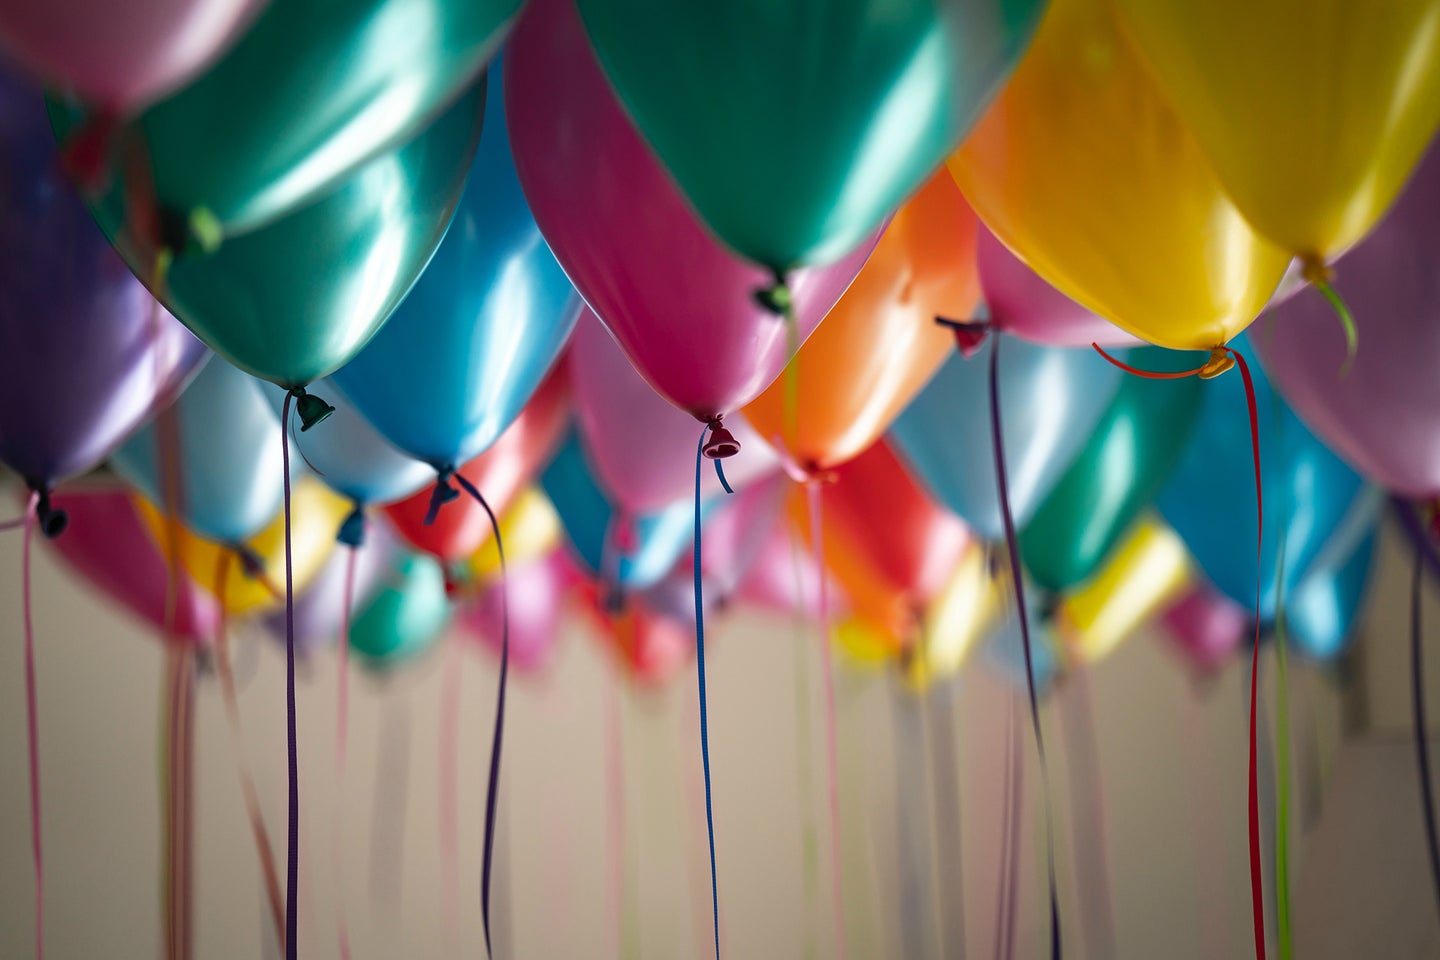 multiple colors of balloons with string hanging